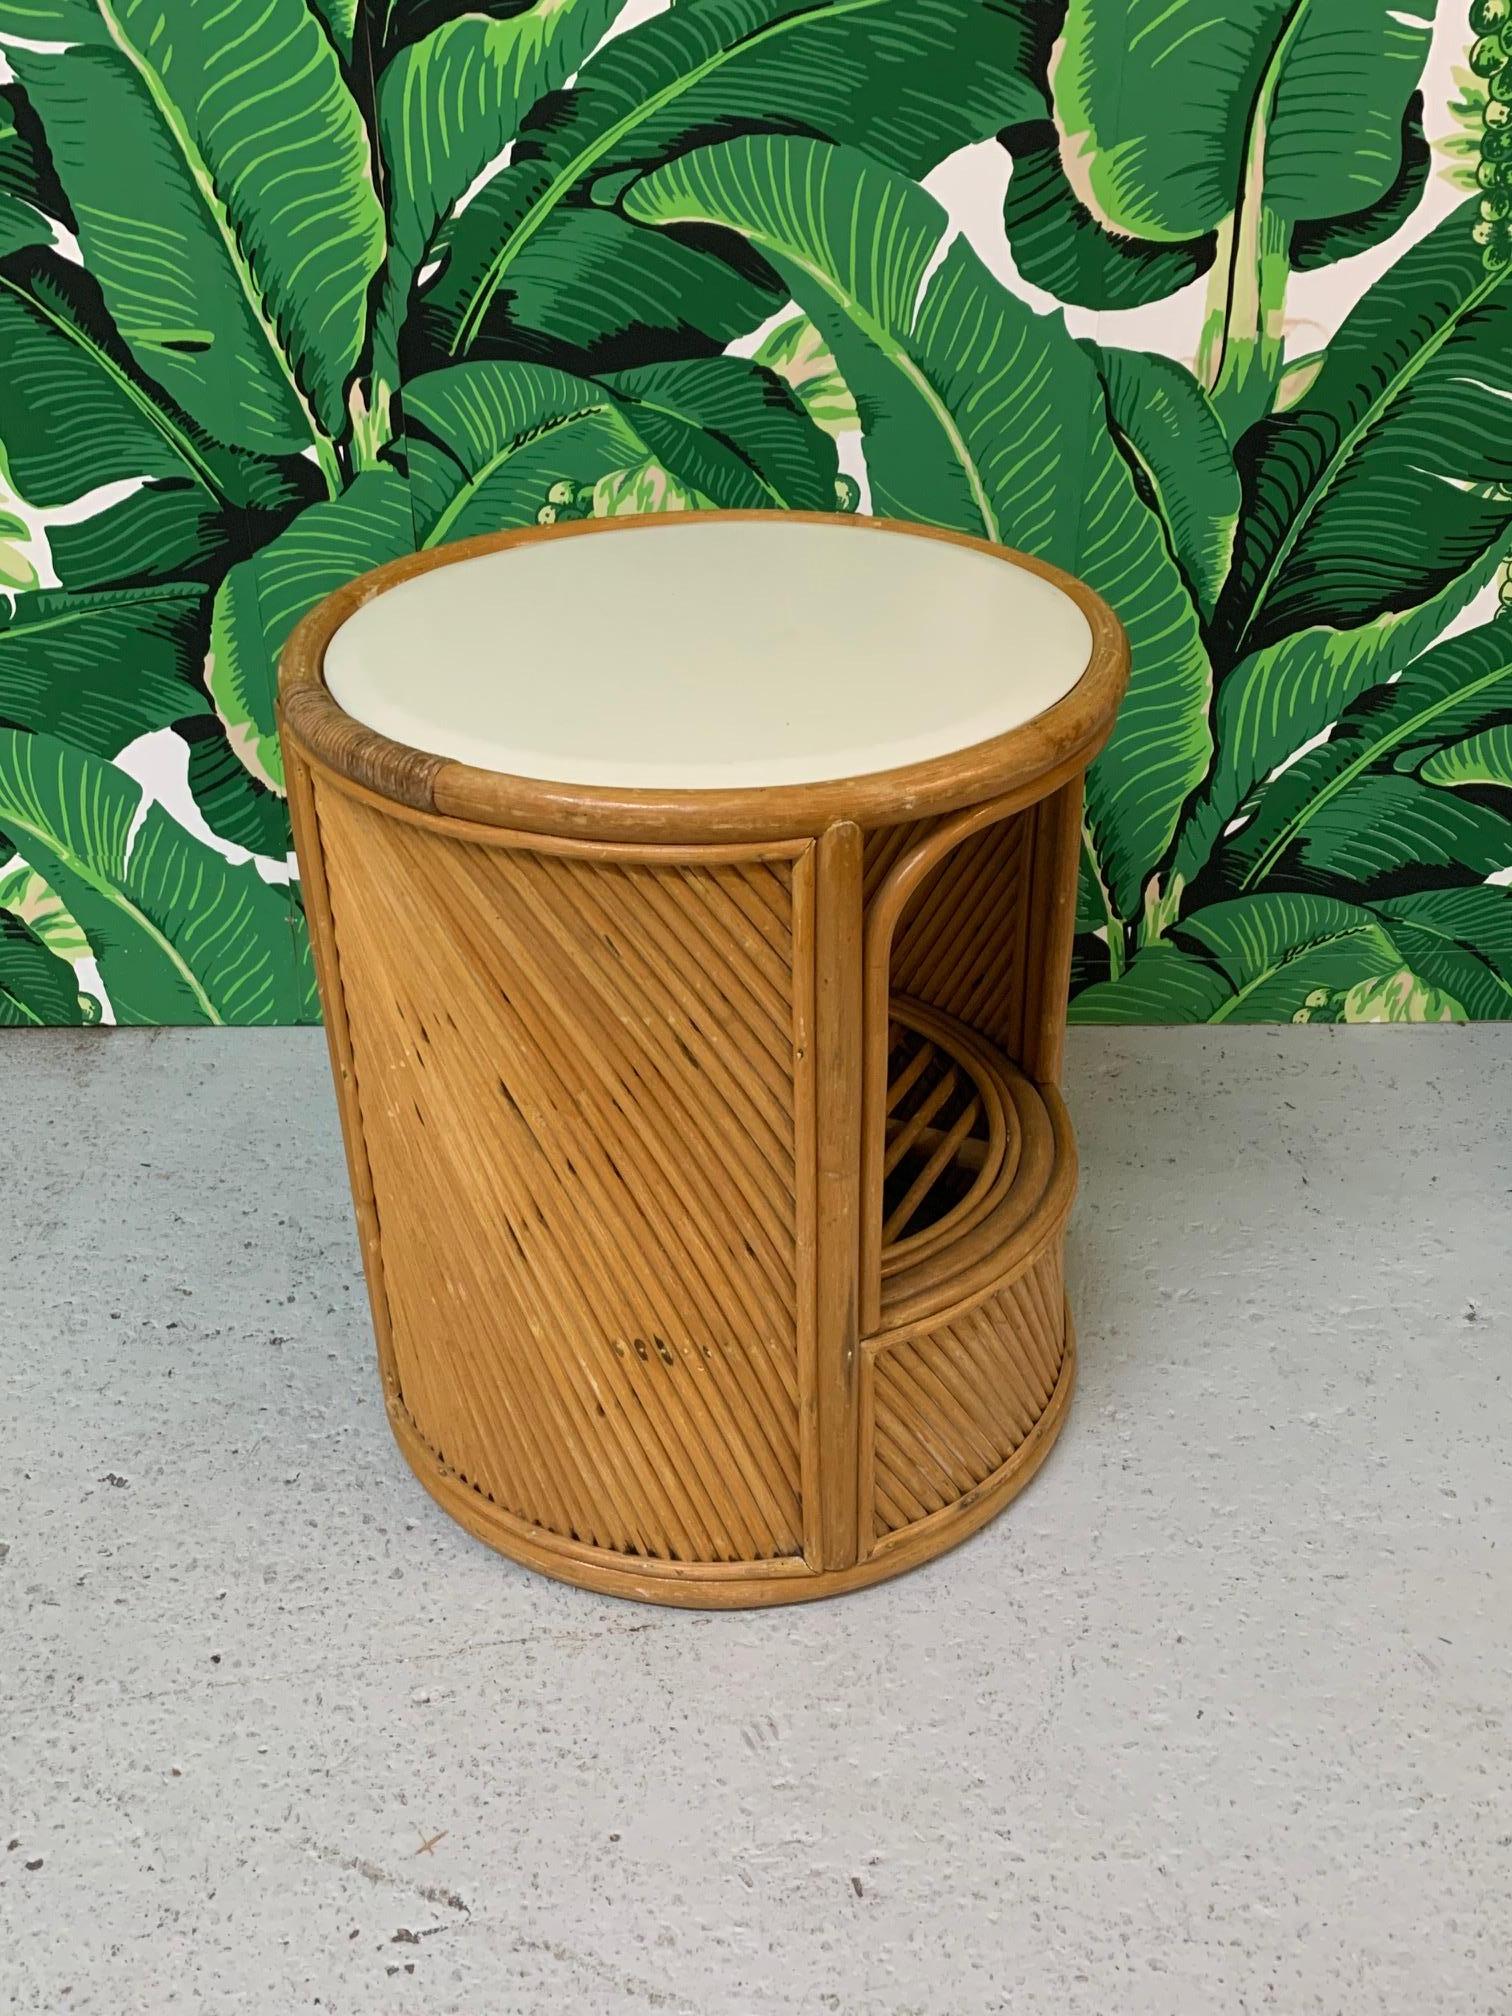 Split reed rattan wrapped side table features pass-through shelf and vinyl covered top. Very good condition with only very minor imperfections consistent with age.